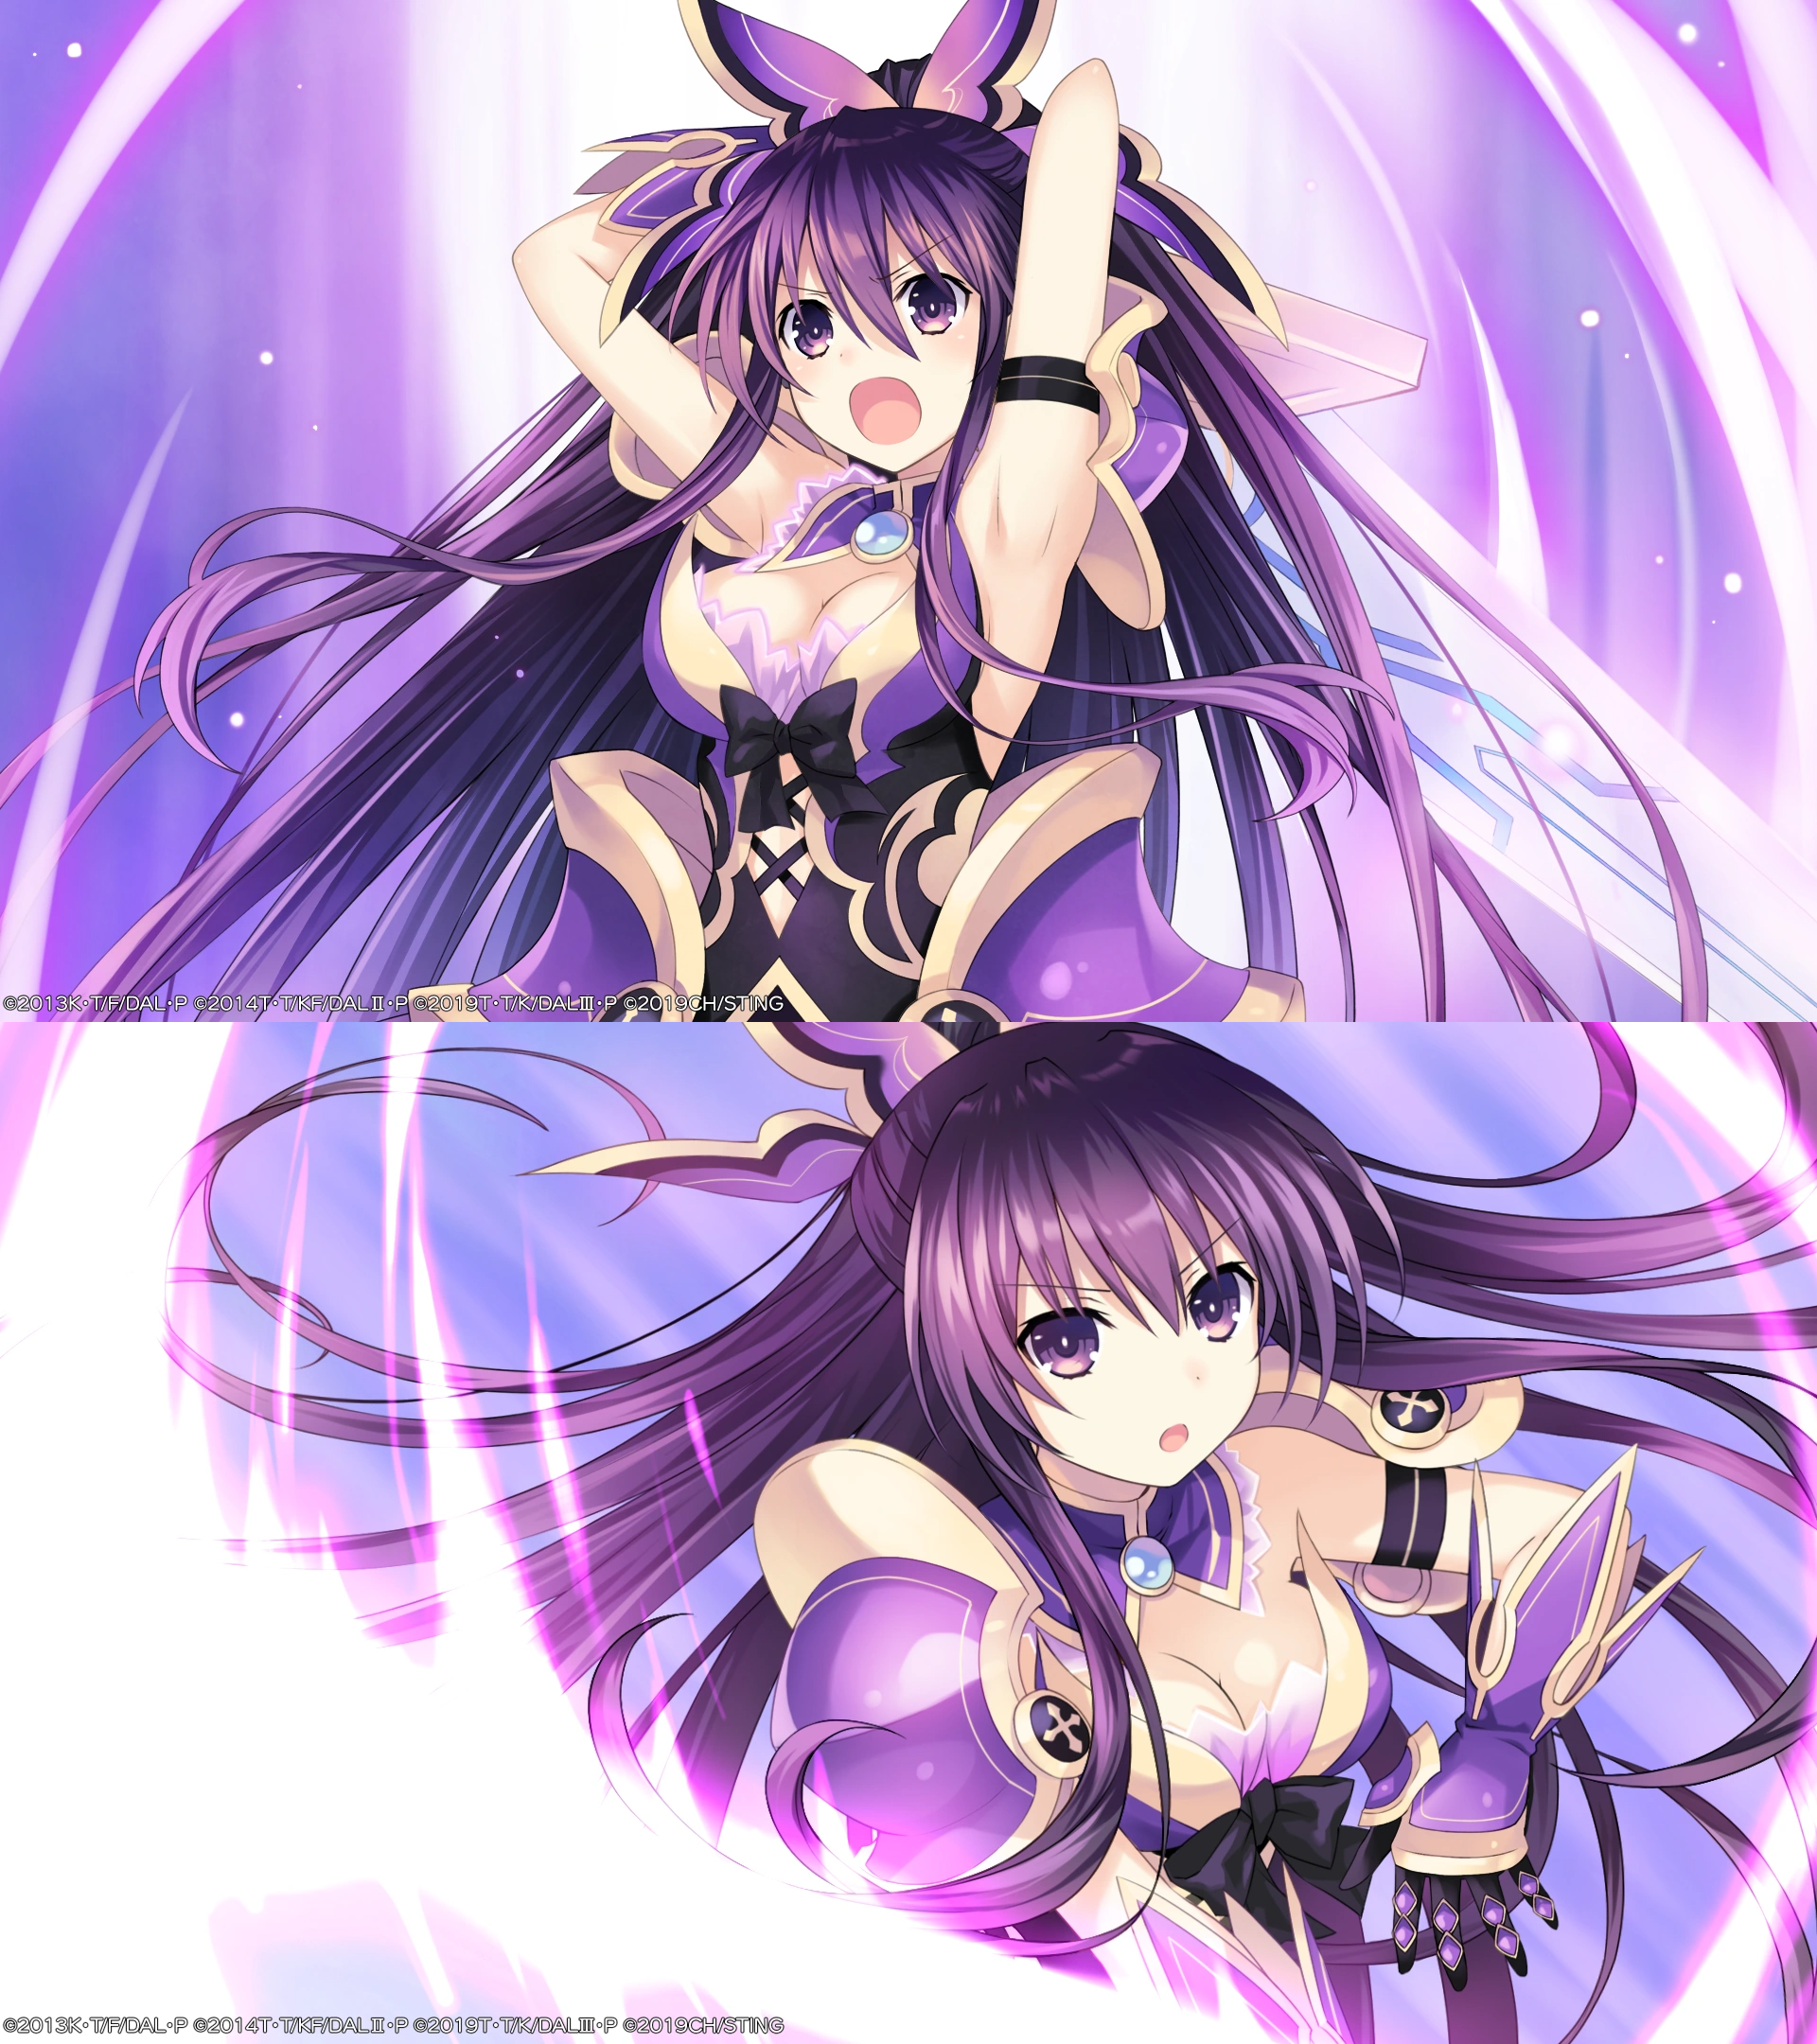 Tohka Yatogami from Date a Live 4 by EC1992 on DeviantArt